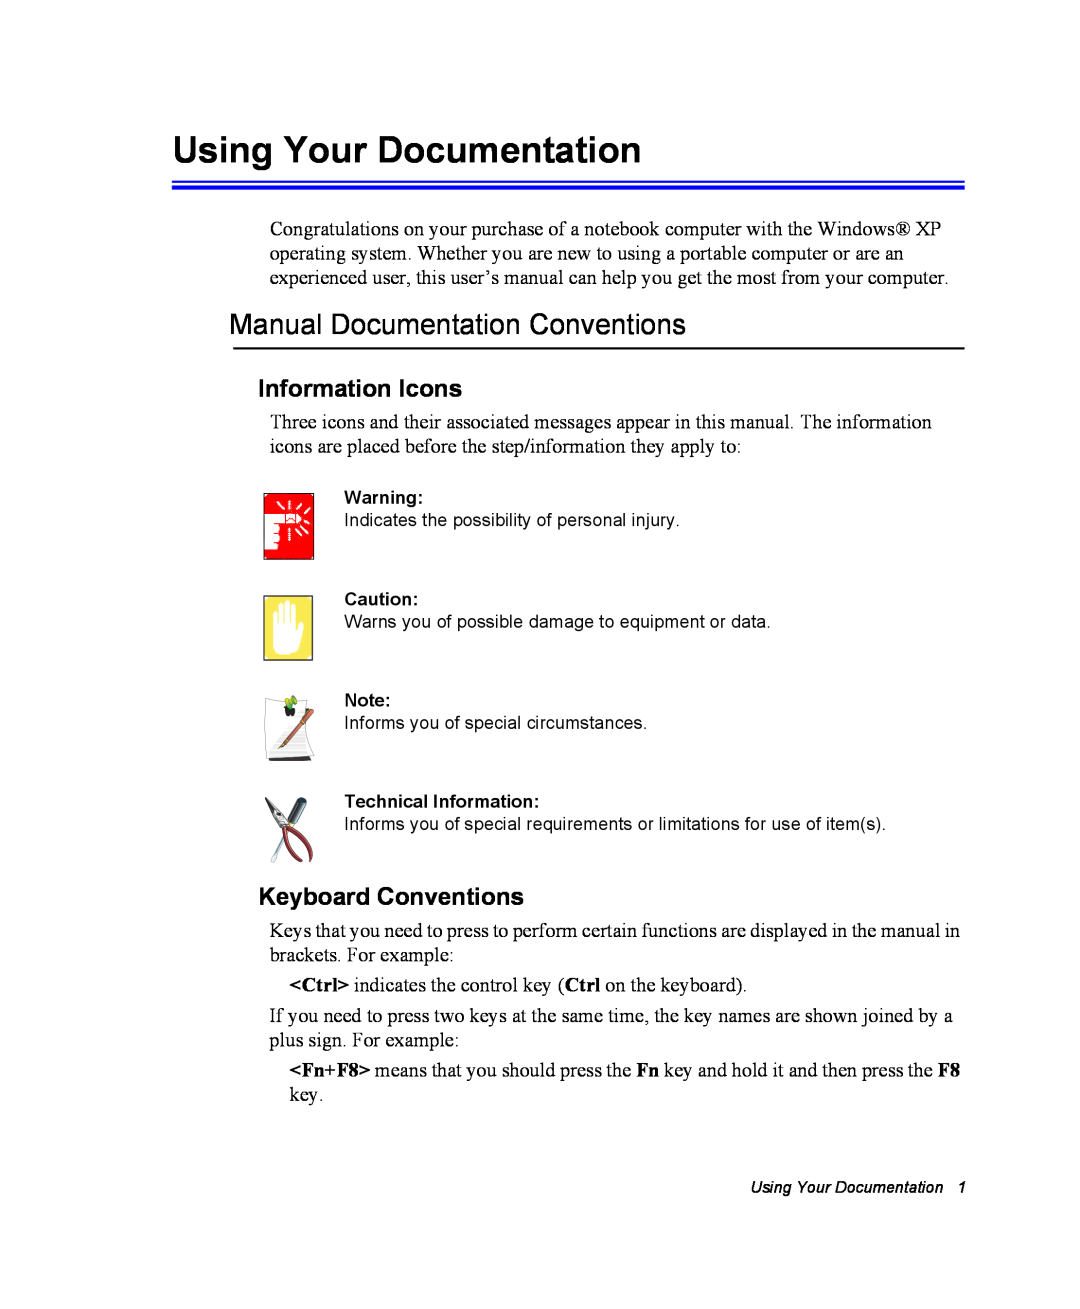 Samsung NX10-SEED/SEG Using Your Documentation, Manual Documentation Conventions, Information Icons, Keyboard Conventions 